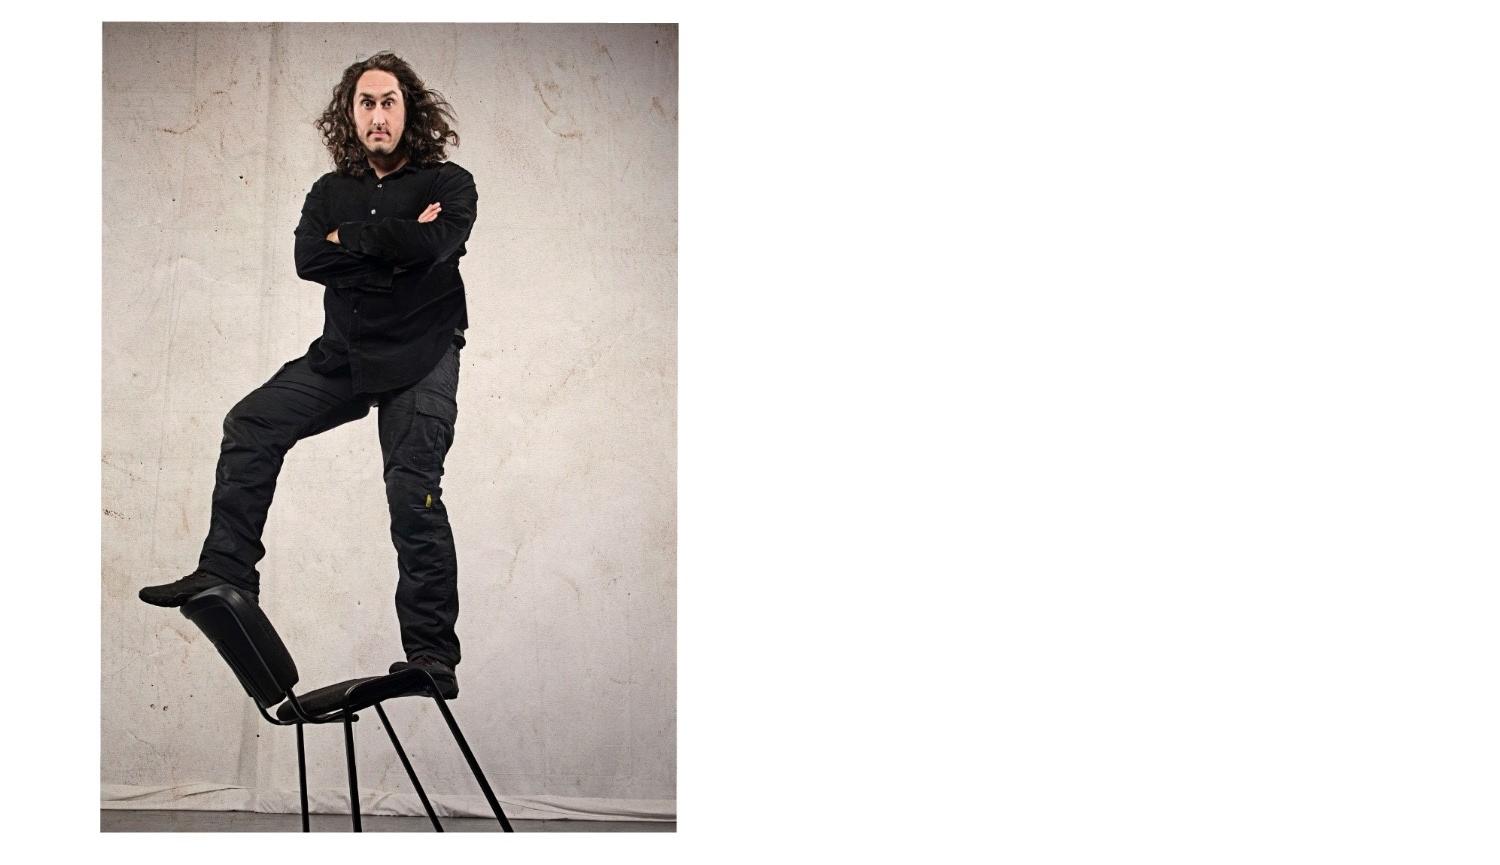 Ross Noble standing on a chair